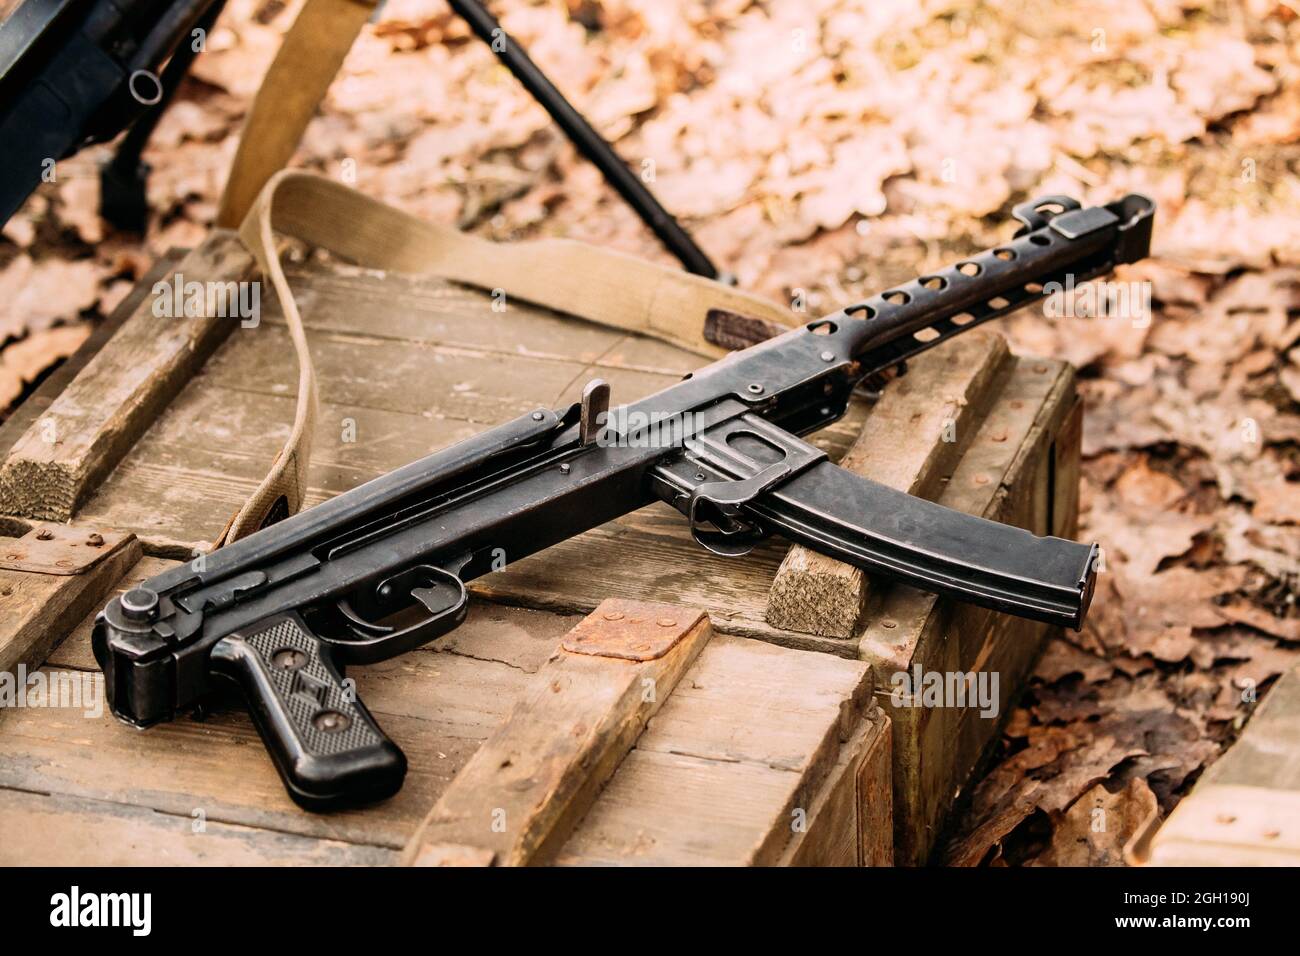 Old Soviet Russian Red Army Submachine Gun PPS-43 Of World War Ii Lying On The Wooden Box. Stock Photo